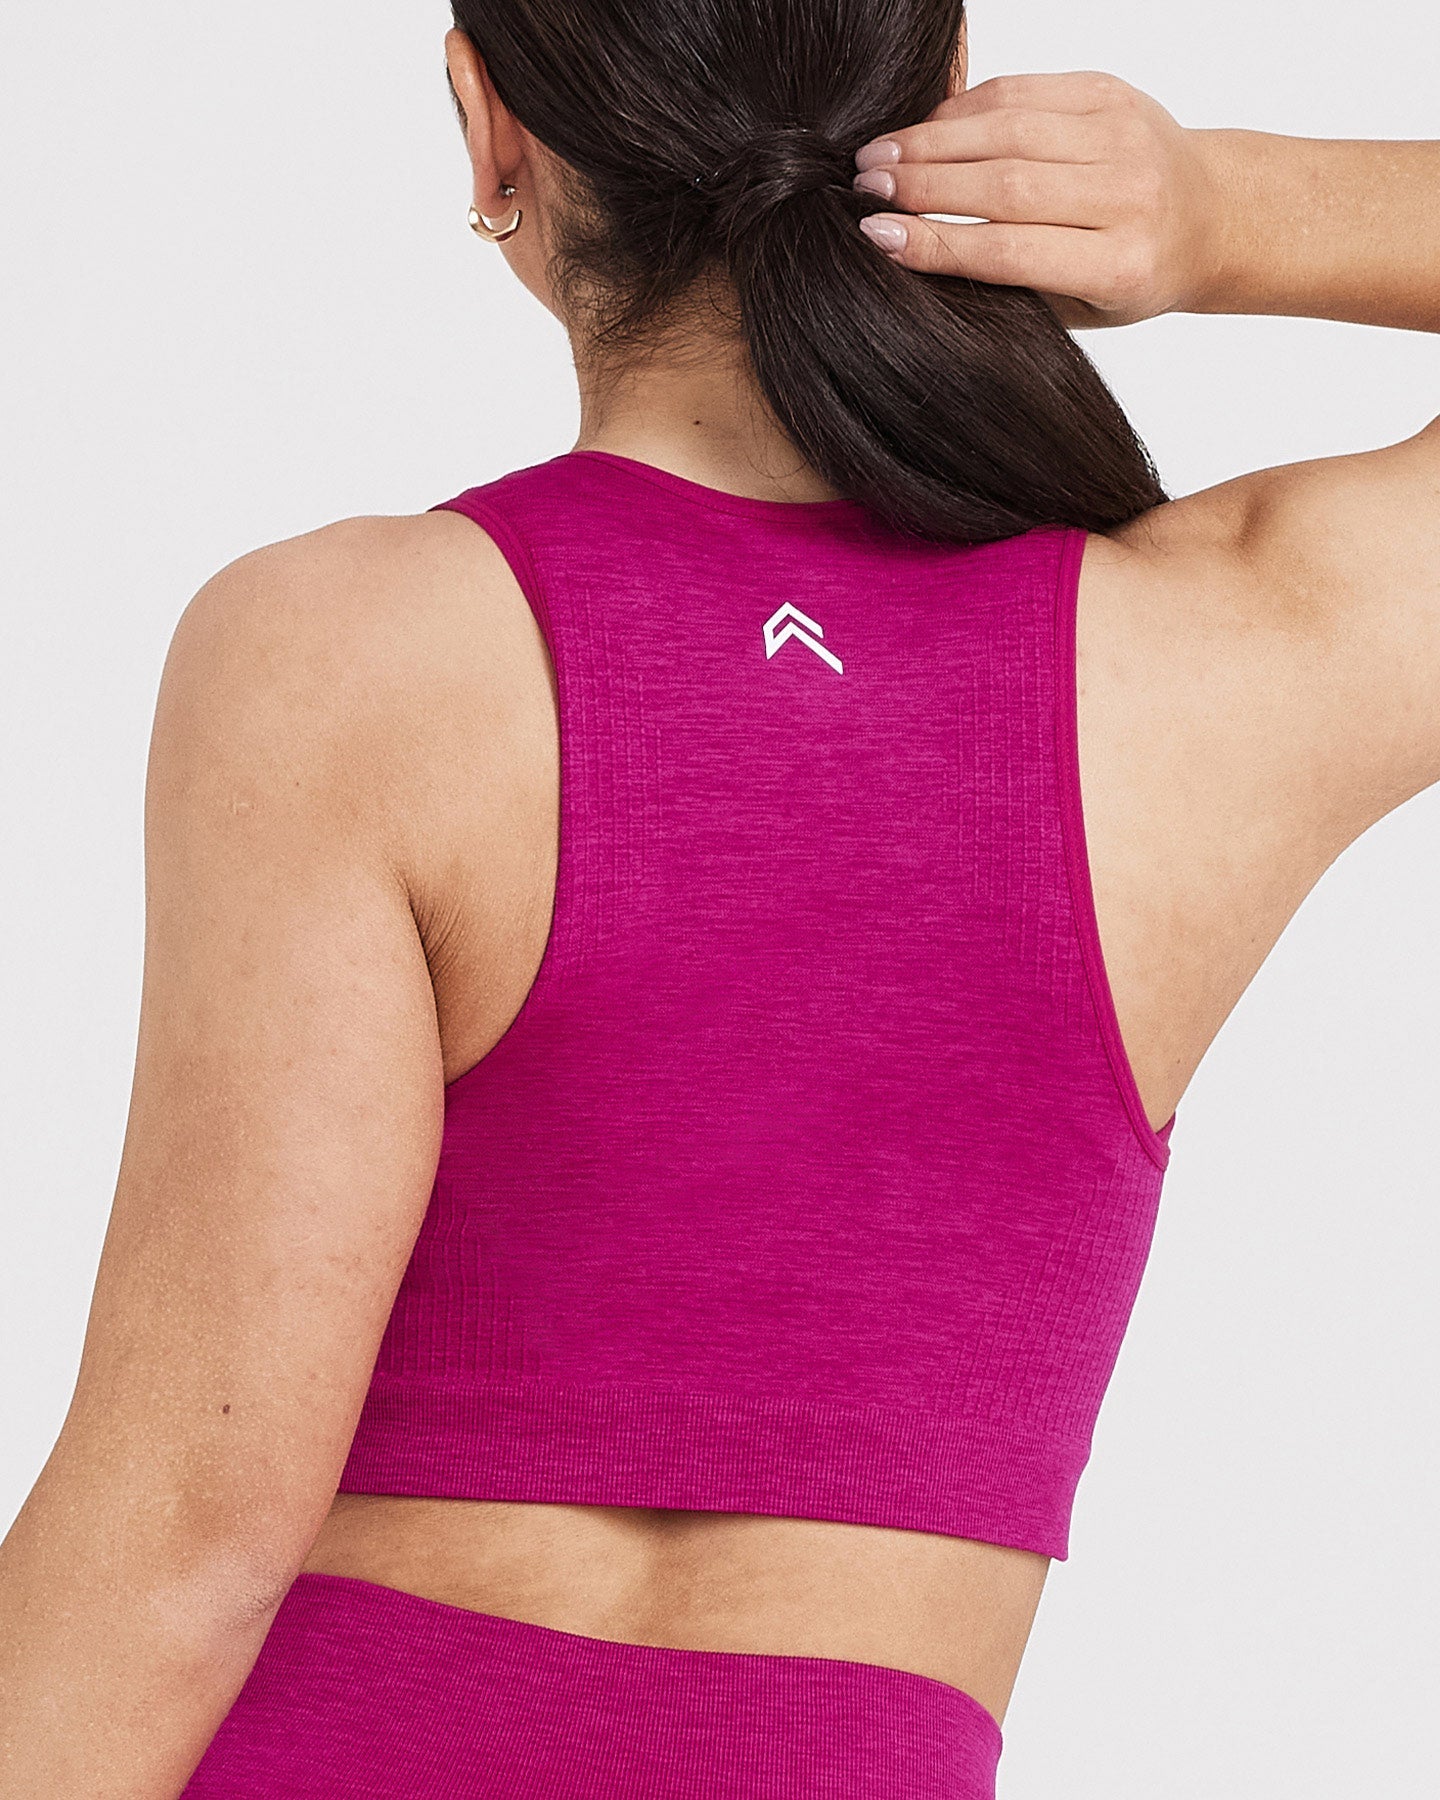 Pure Barre Circle P Fitted Crop Top- Pink – Pure Barre Bethesda